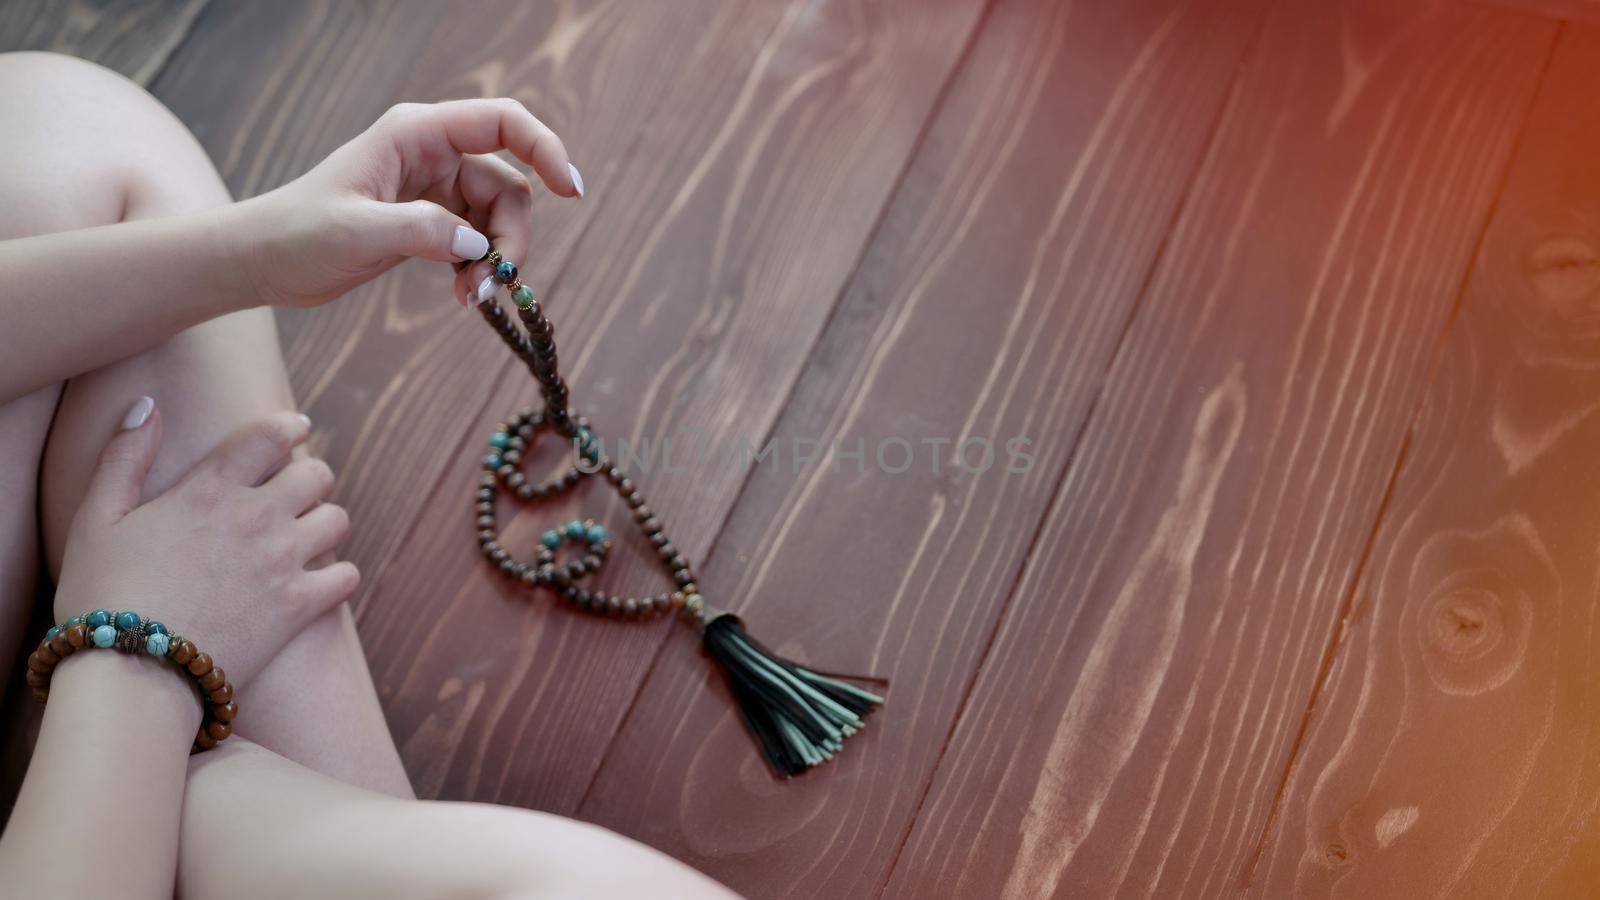 Woman lit hand counts mala beads strands of gemstones used for keeping count during mantra meditations. Lady sits on wooden floor. Spirituality, religion, God concept. Copy space by kristina_kokhanova